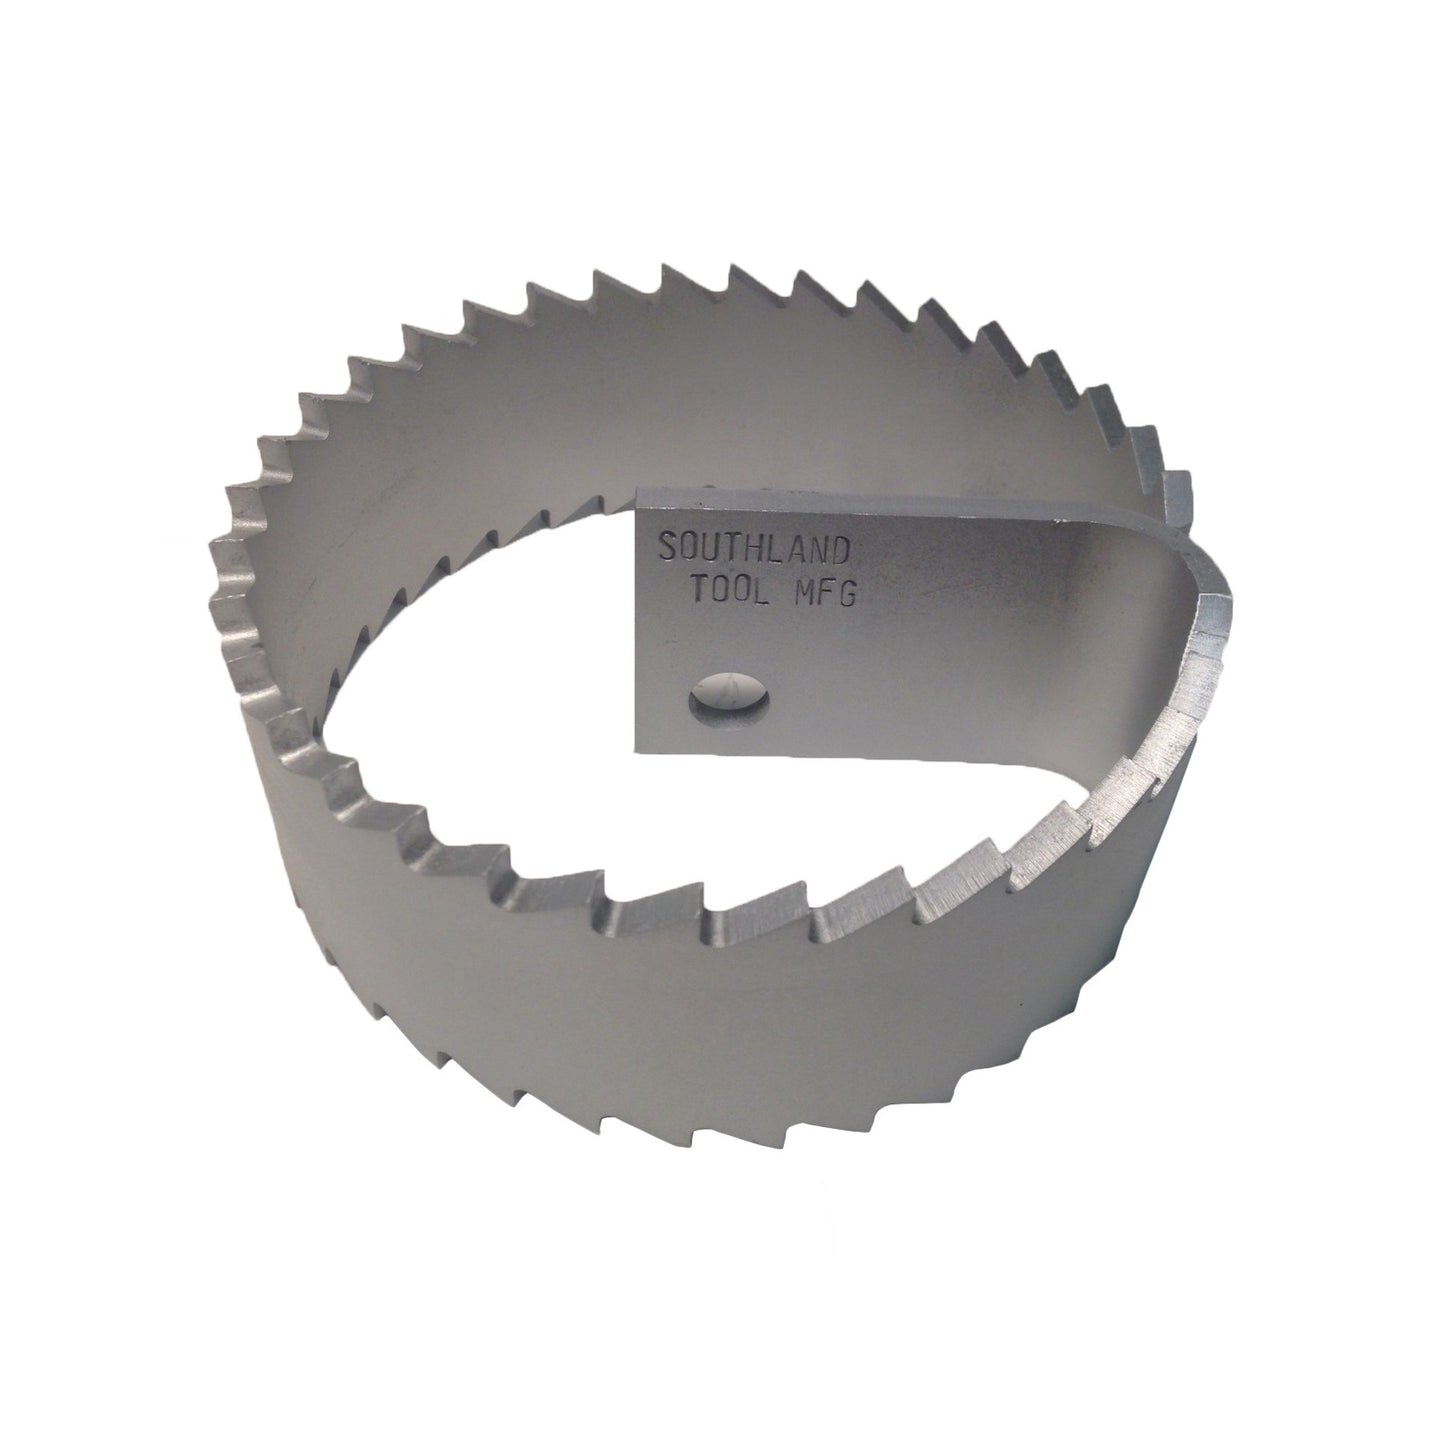 Super Heavy Duty Root Saw Blade